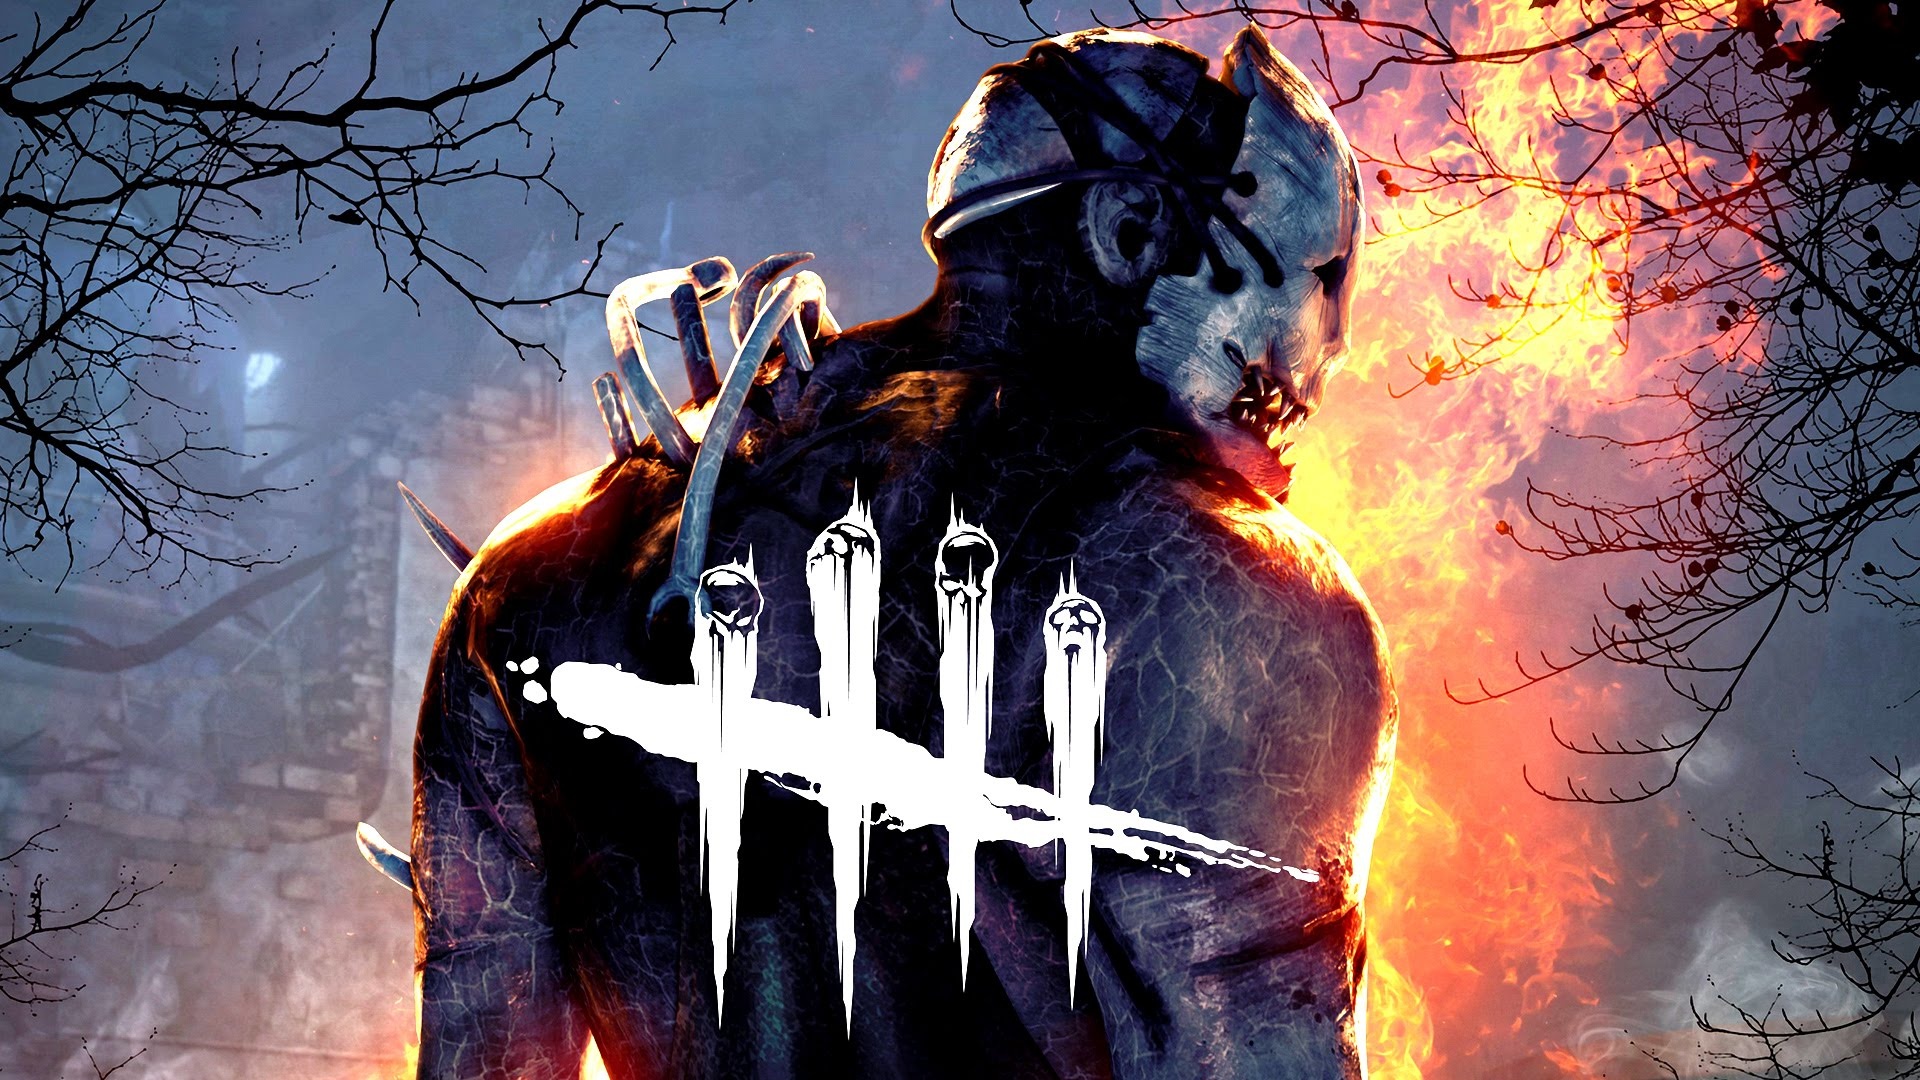 Dead by Daylight, Gaming, HD wallpapers, Mobile wallpapers, 1920x1080 Full HD Desktop